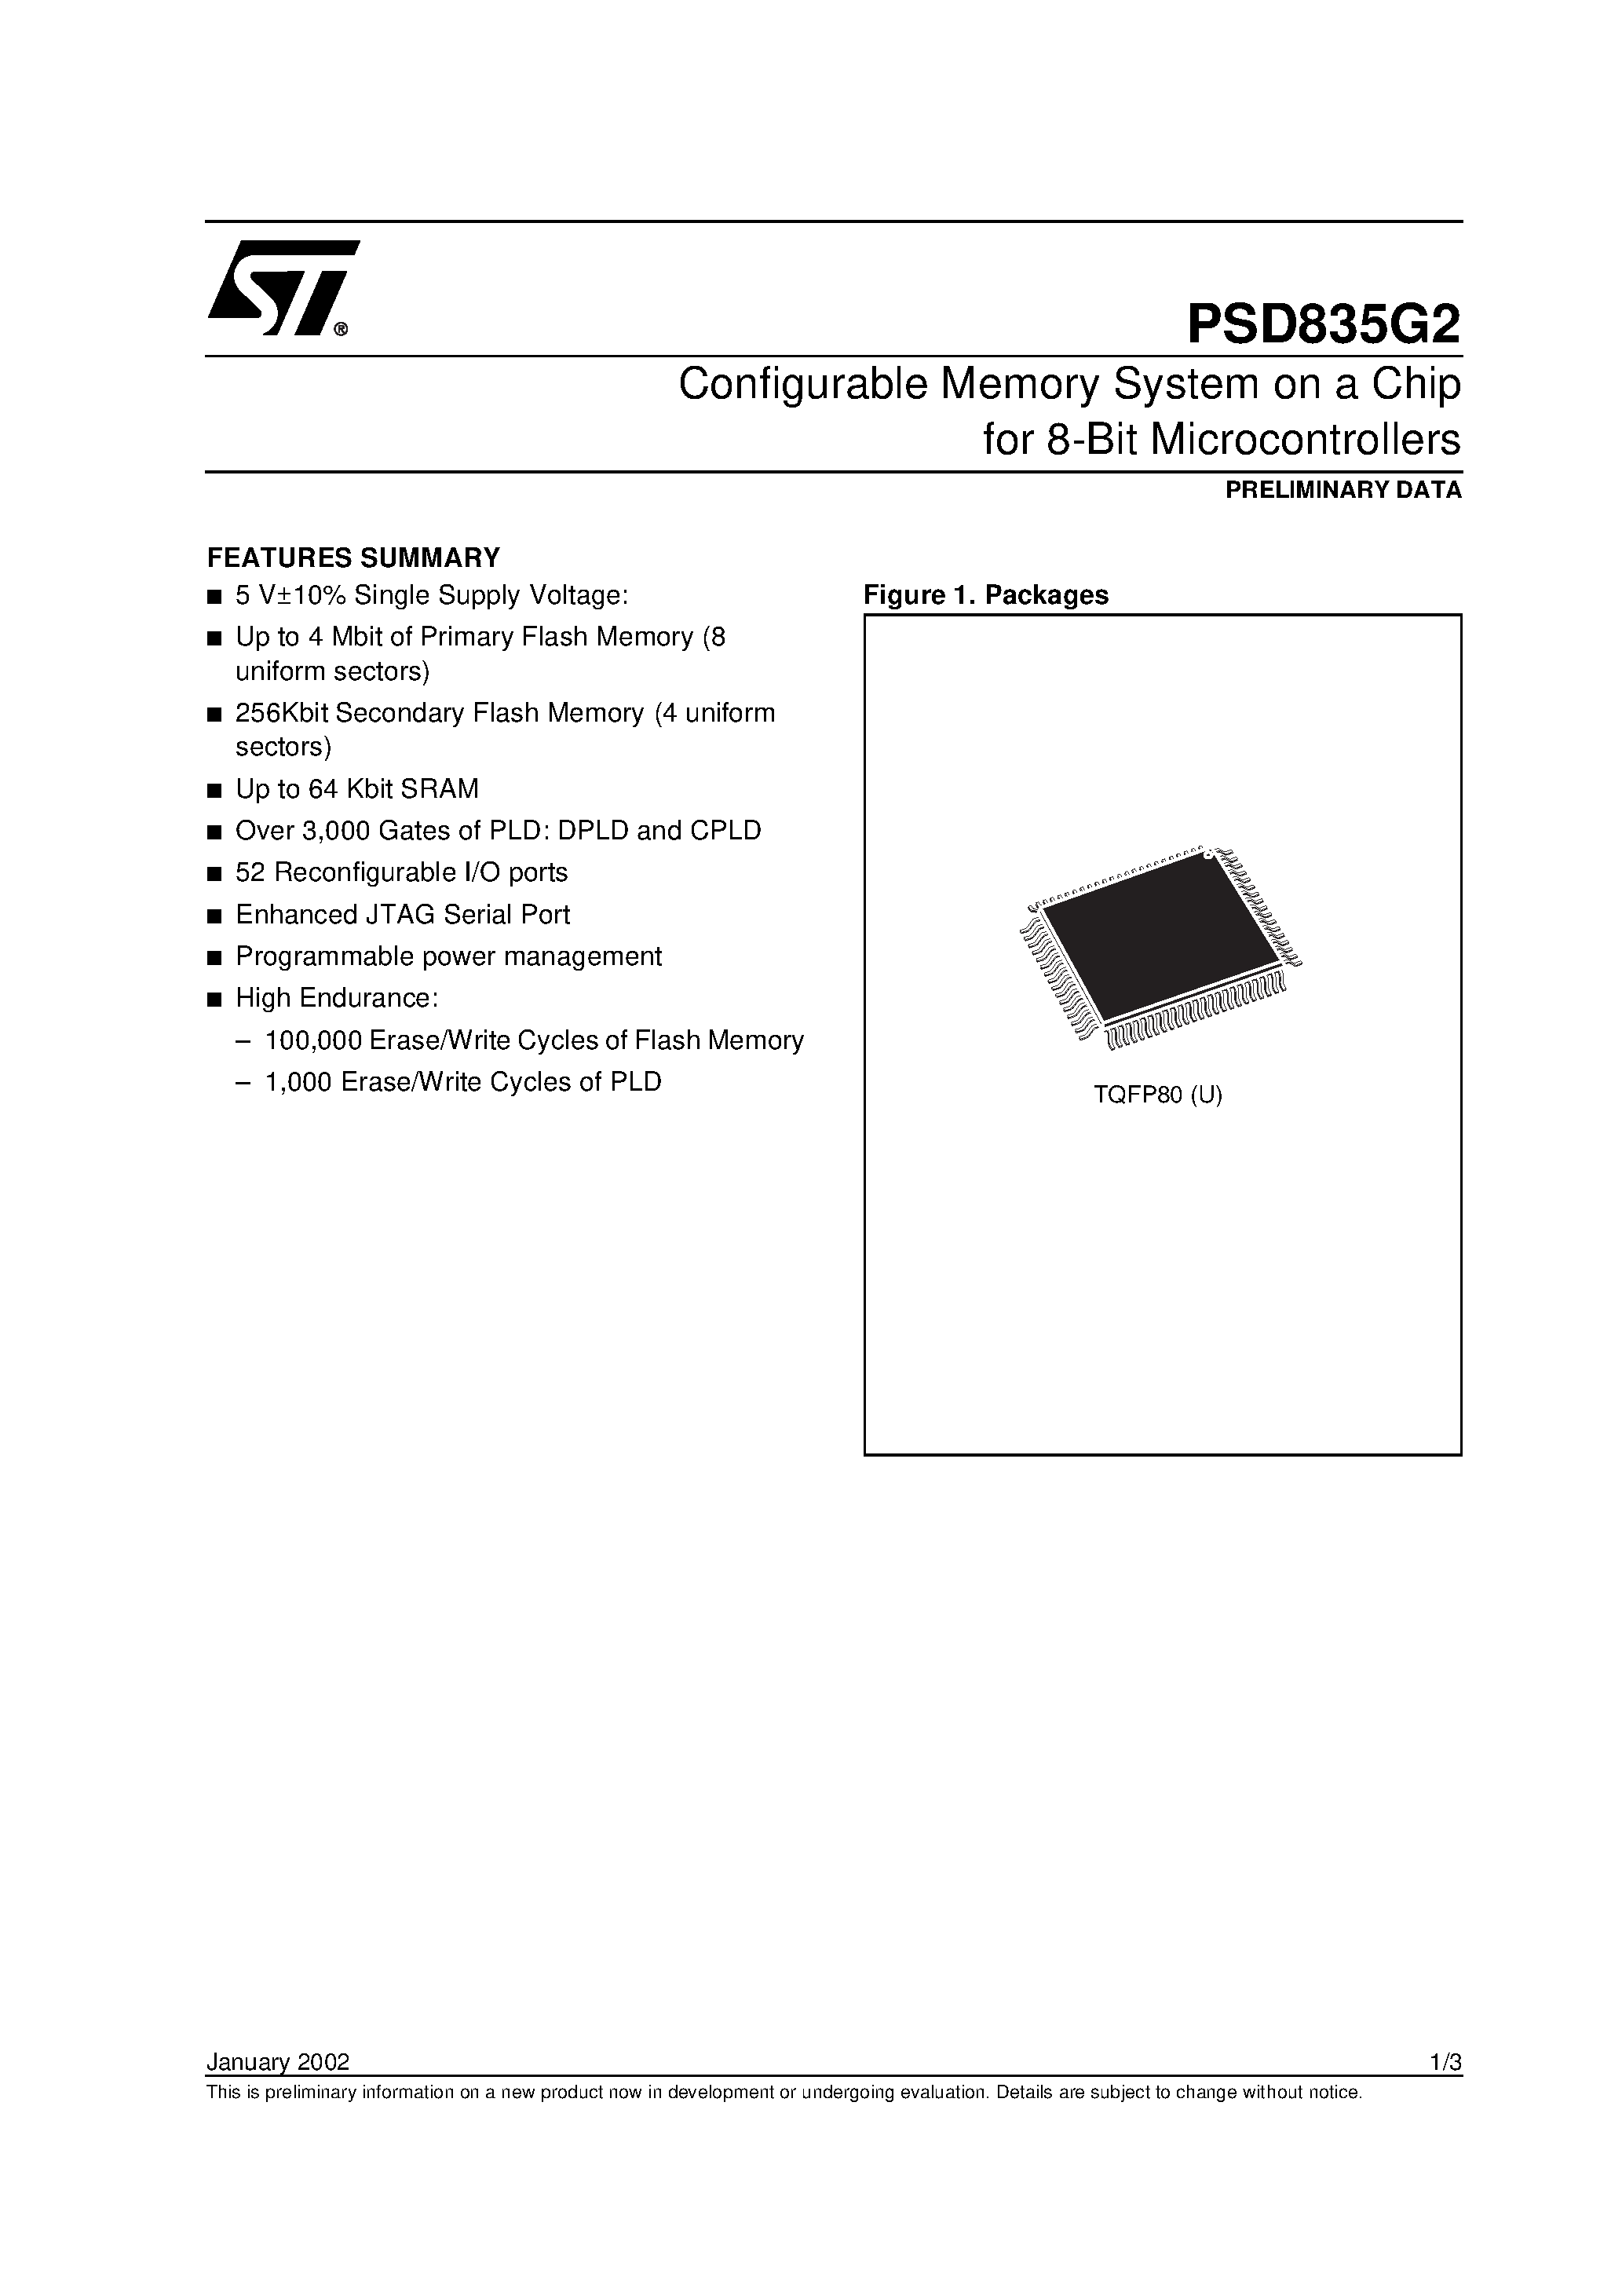 Datasheet PSD835F1-A-20JI - Configurable Memory System on a Chip for 8-Bit Microcontrollers page 1